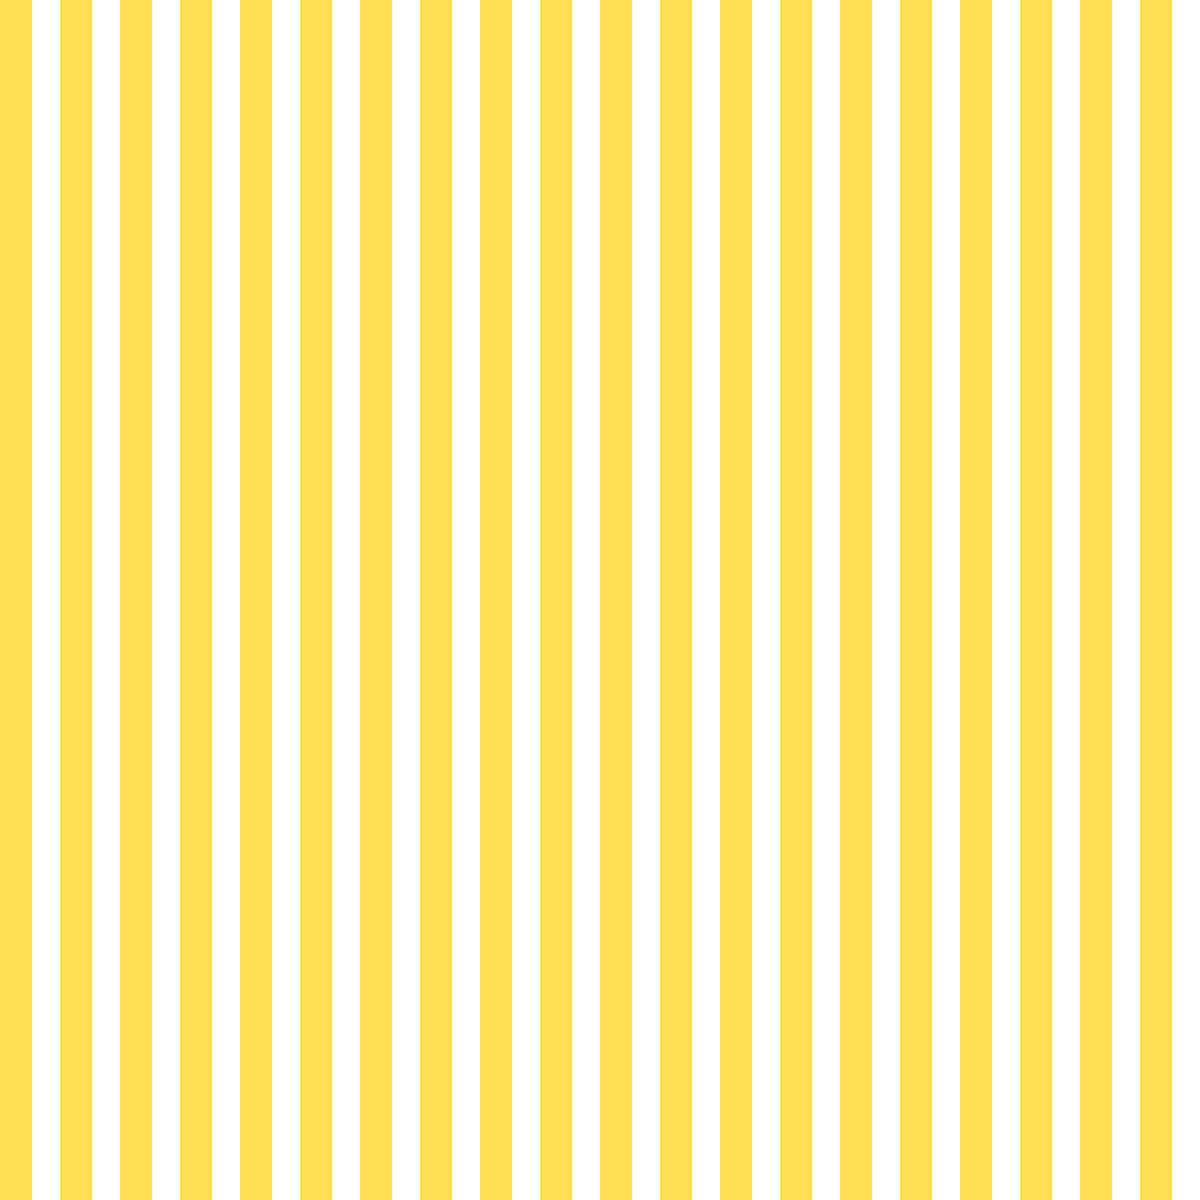 Harwood Stripe Wallpaper in YellowCream by Colefax and Fowler